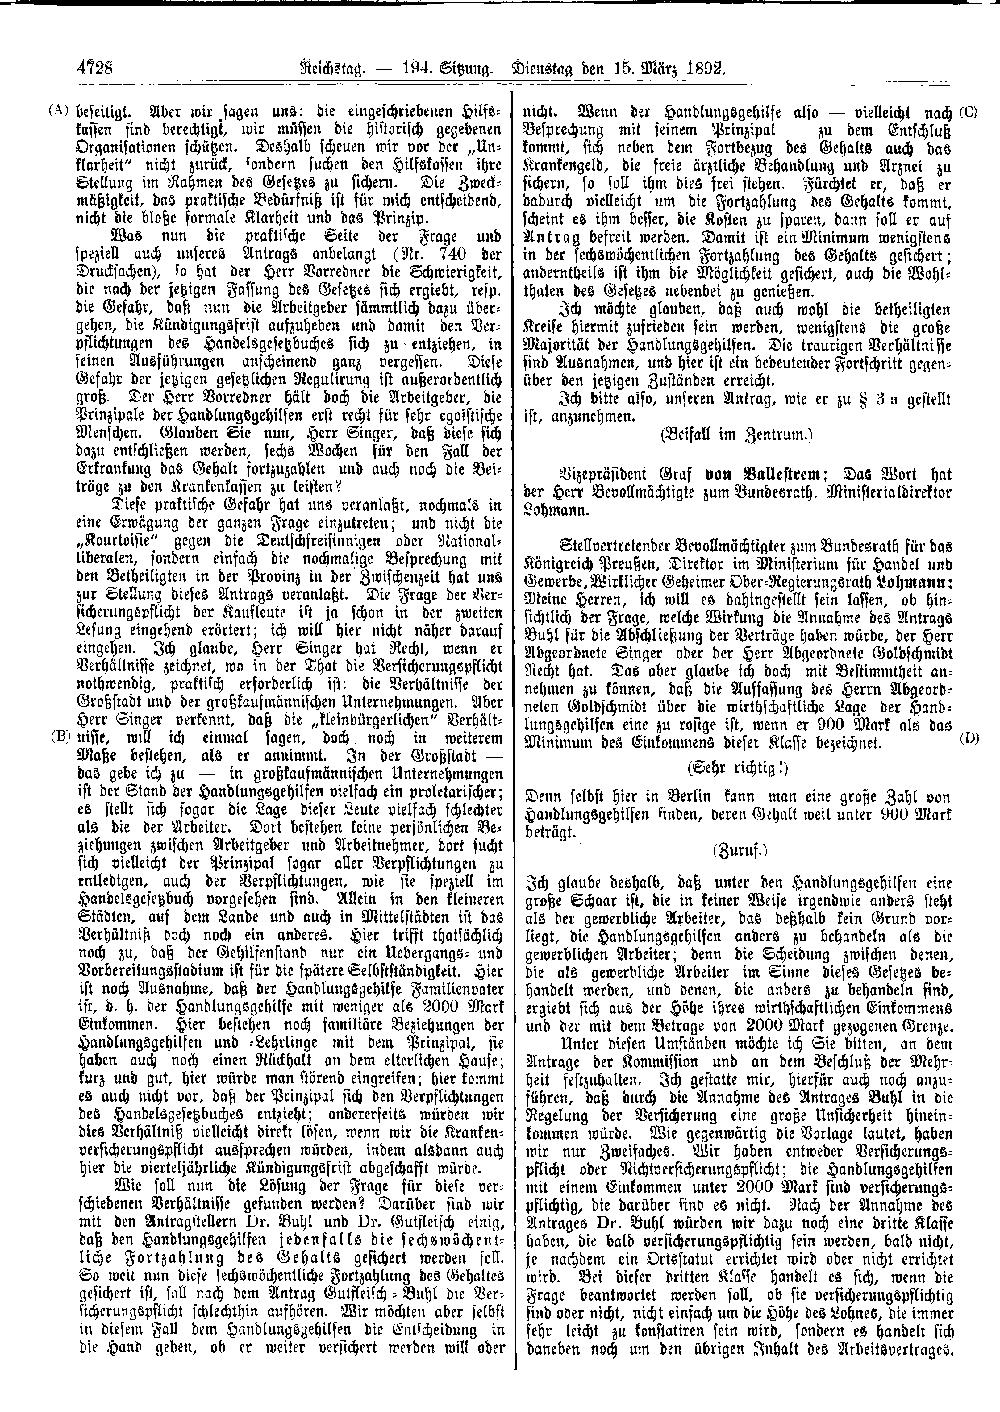 Scan of page 4728